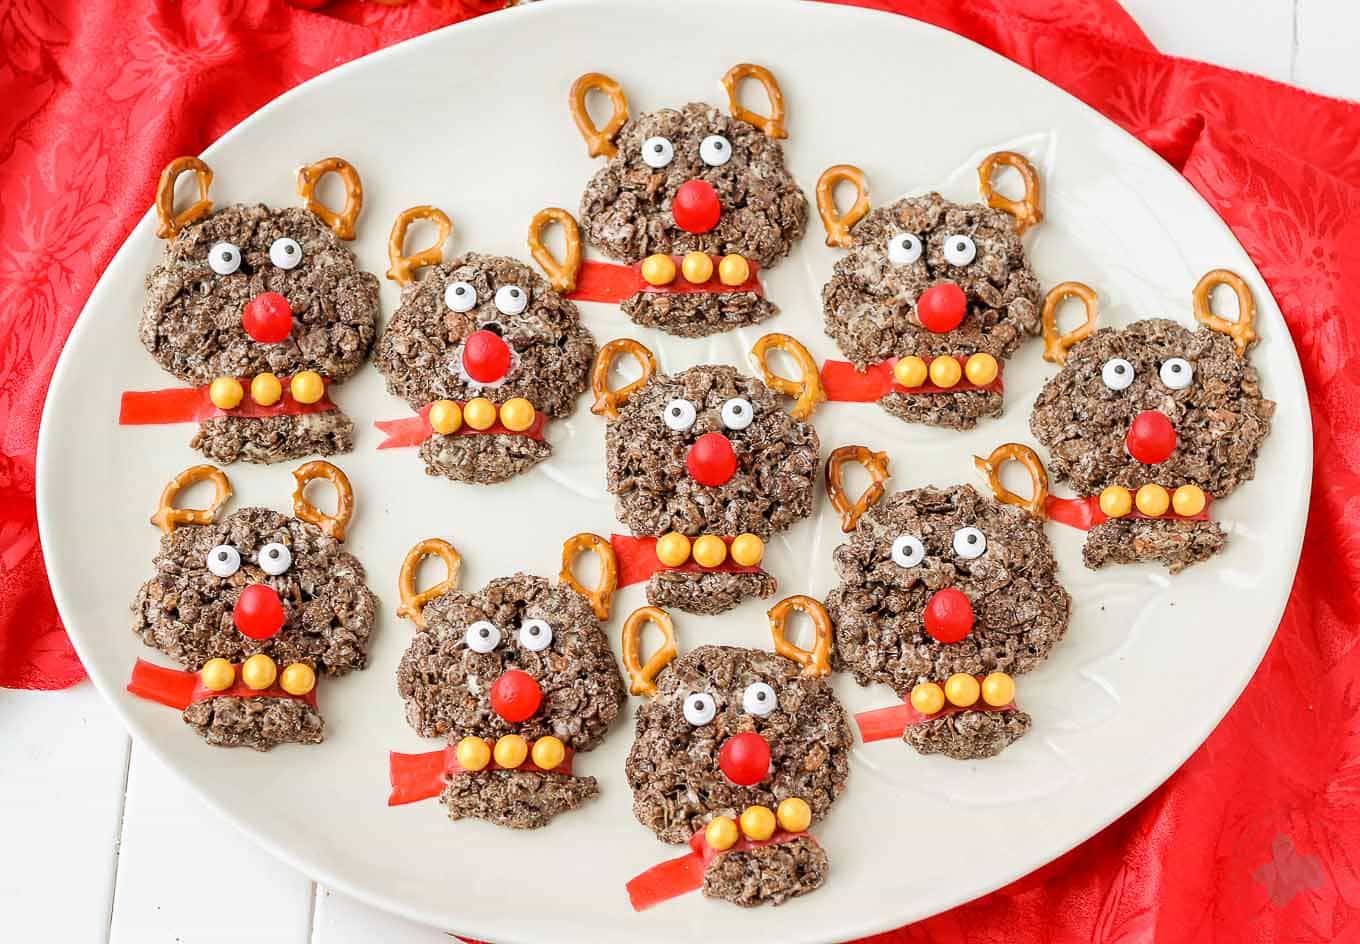 Delicious and {almost} too adorable to eat, these Rudolph the Red Nosed Reindeer Cocoa Pebbles Treats will joy and delight kids and adults alike. We can't forget about Rudolph the Red Nosed Reindeer, after all he is the one who guides Santa's sleigh. These Cocoa Pebbles treats are fun for all your holiday parties this season and they taste great too! | Strawberry Blondie Kitchen